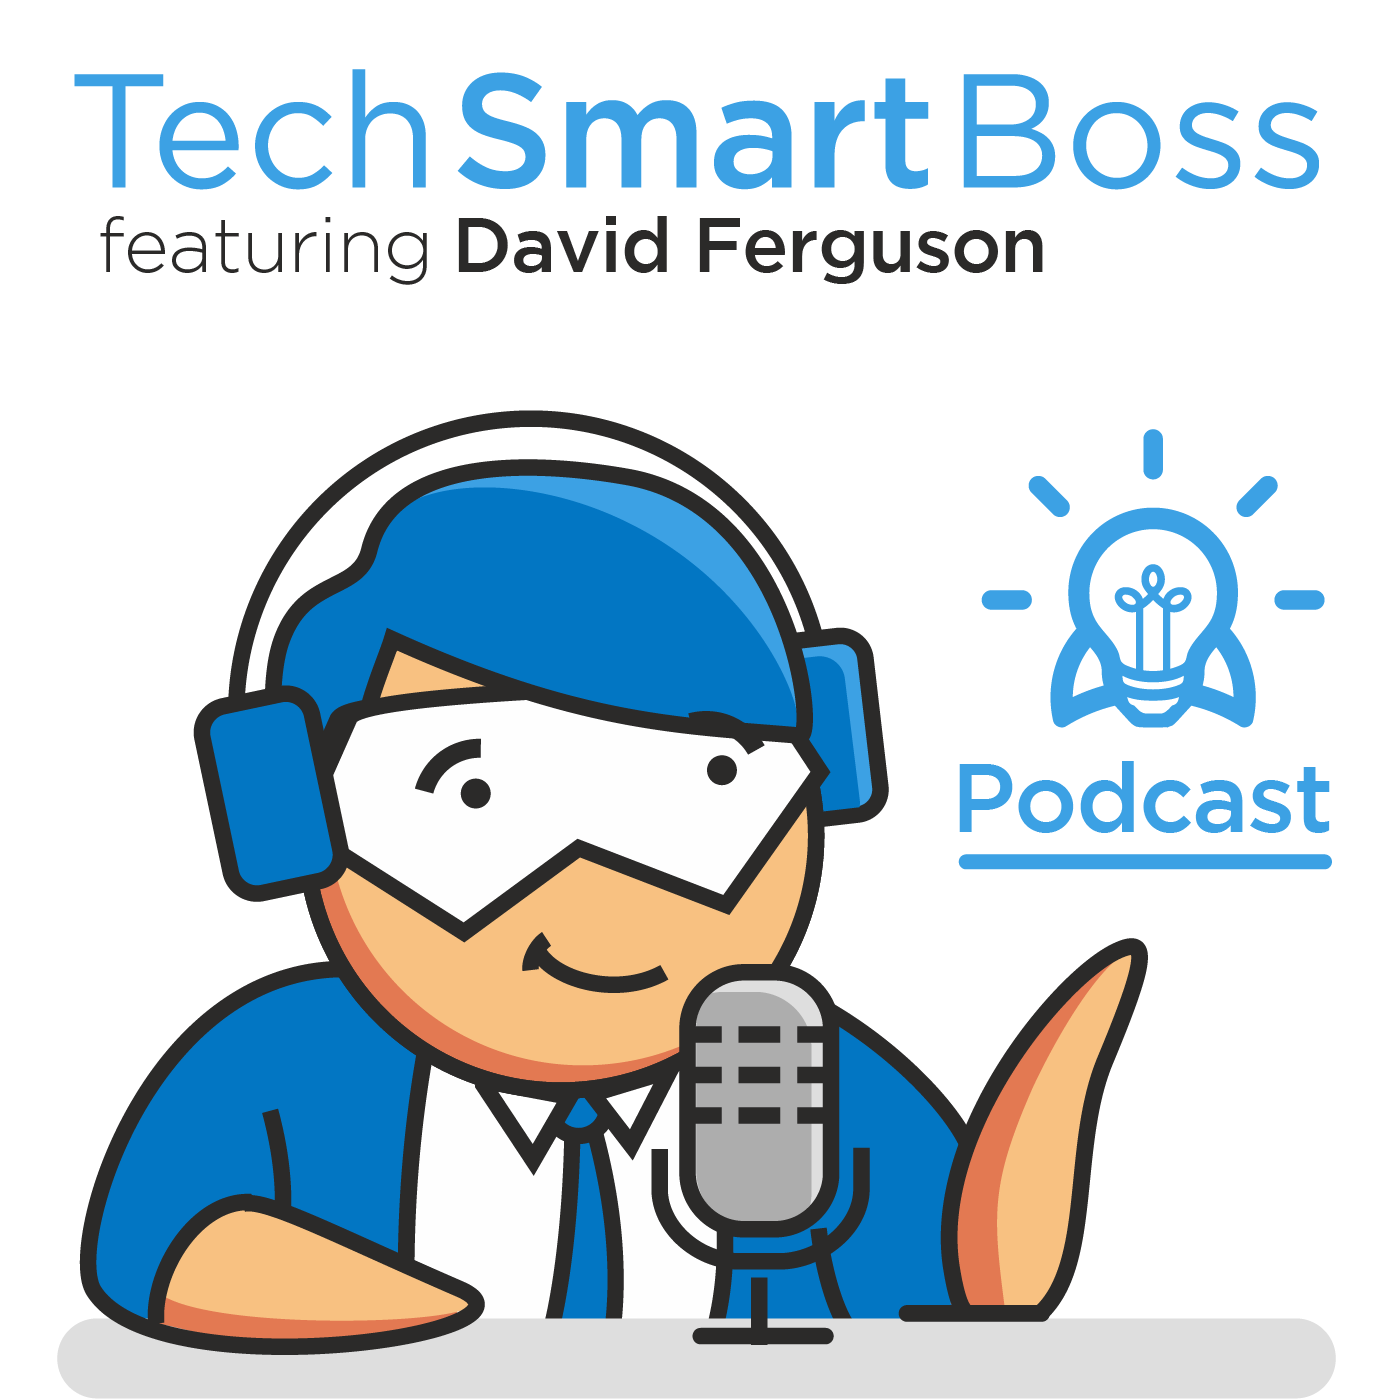 Episode 117: How To Do A/B Testing When You're A Small Business (The Tech Smart Boss Way)